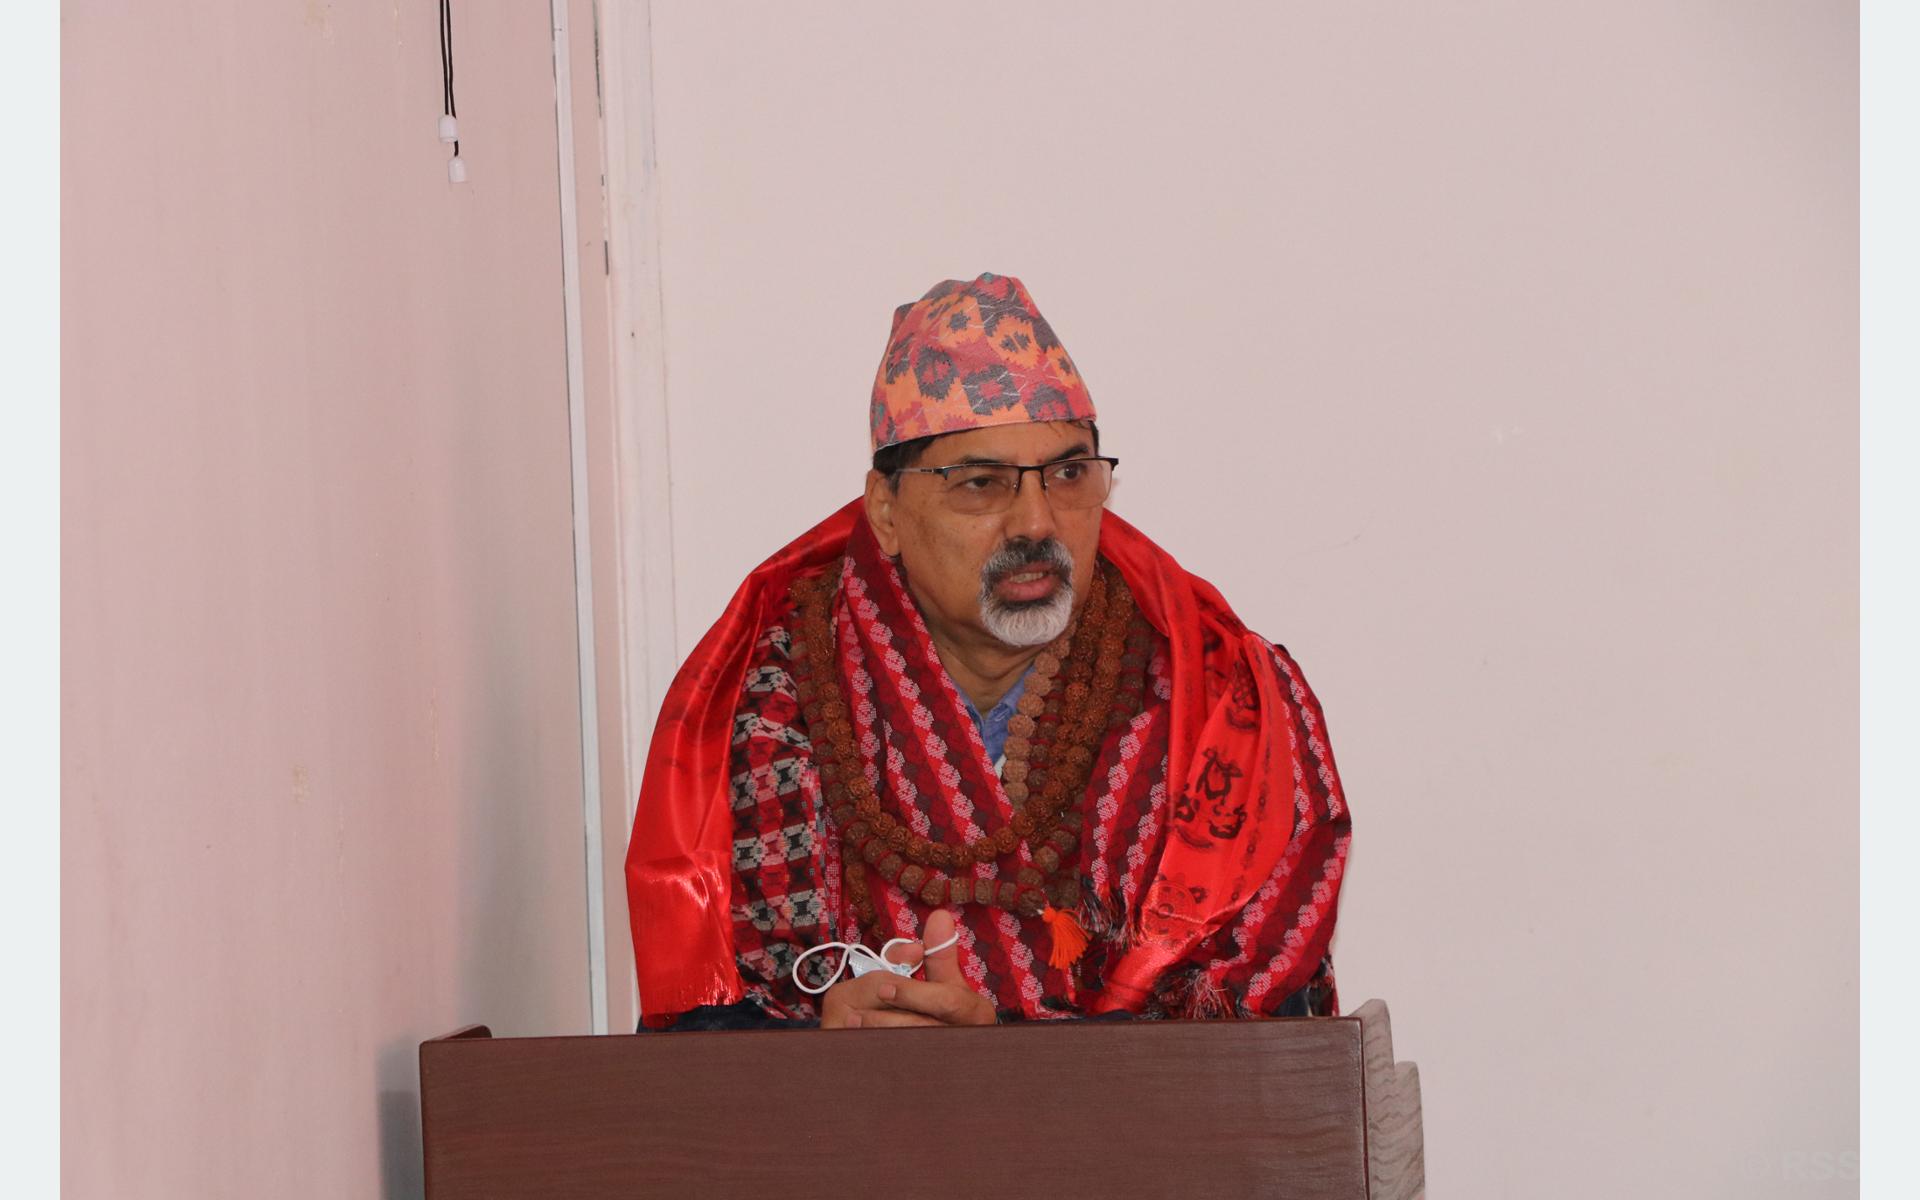 Arun-produced power would enable Nepal’s economy: Finance Minister Sharma